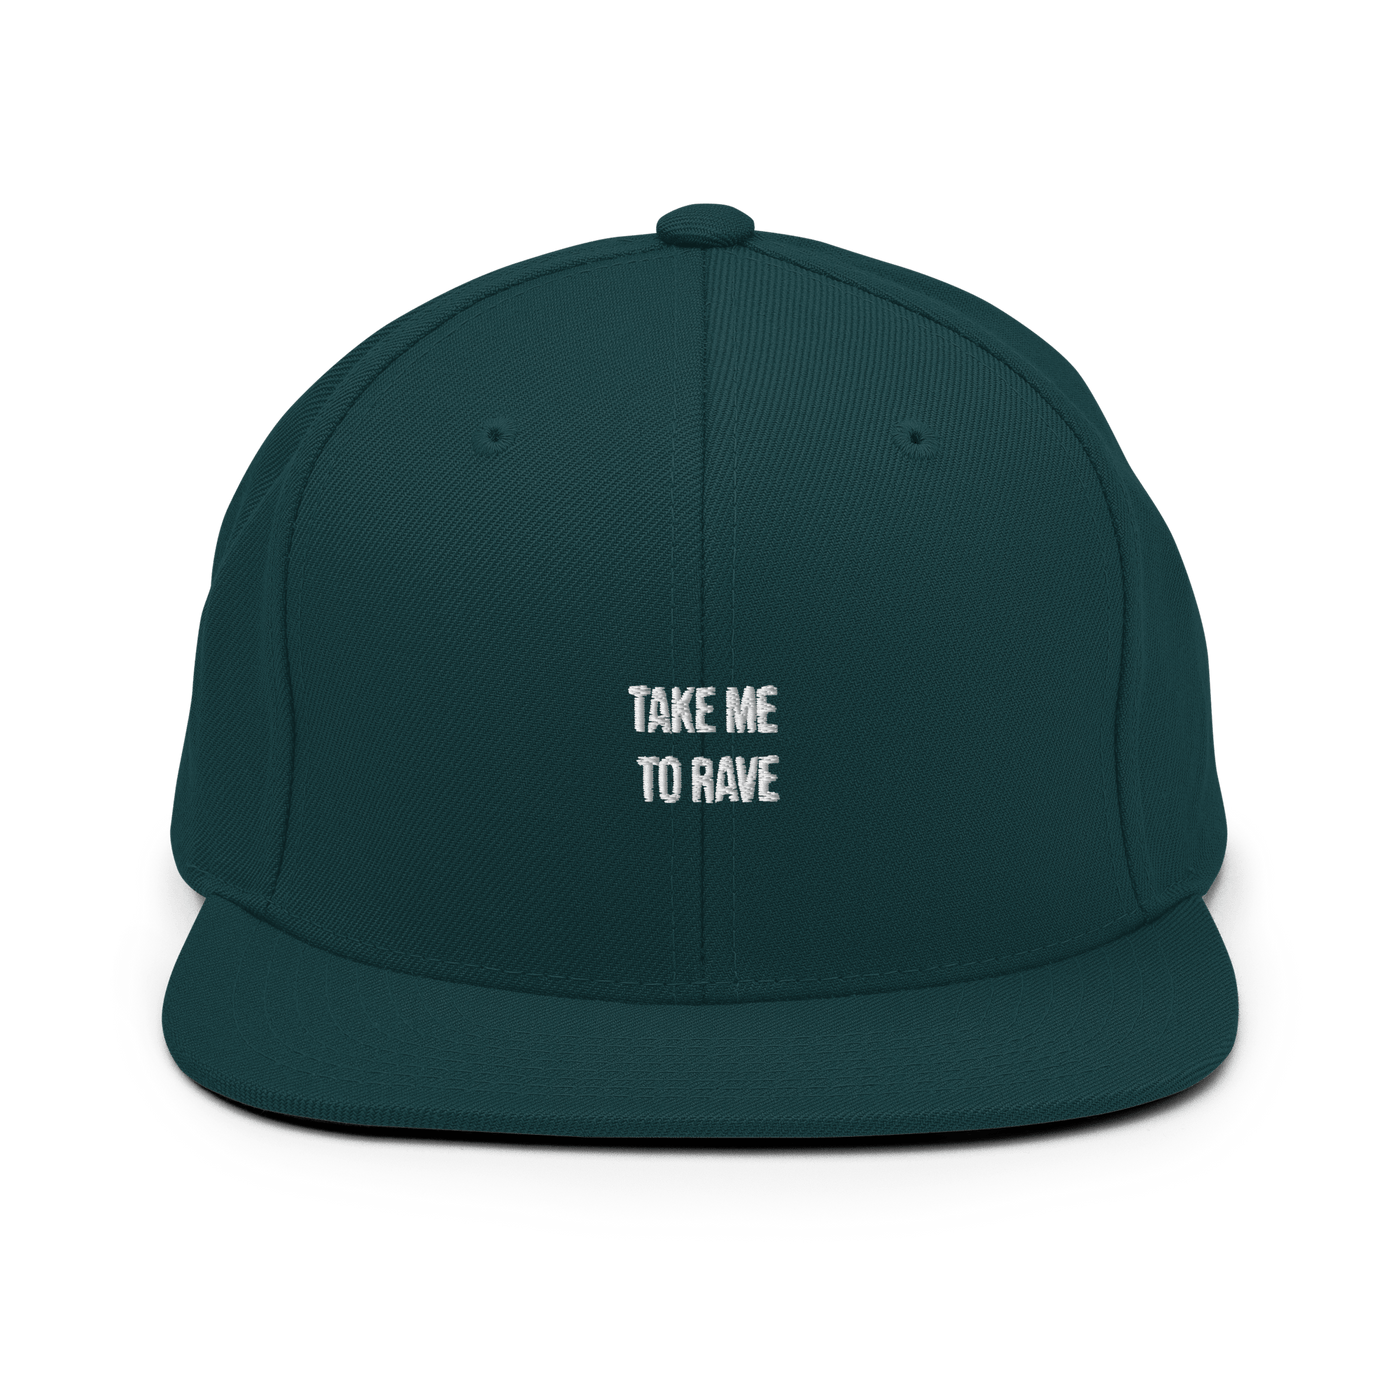 Take me to rave Snapback - Spruce - - Just Another Cap Store